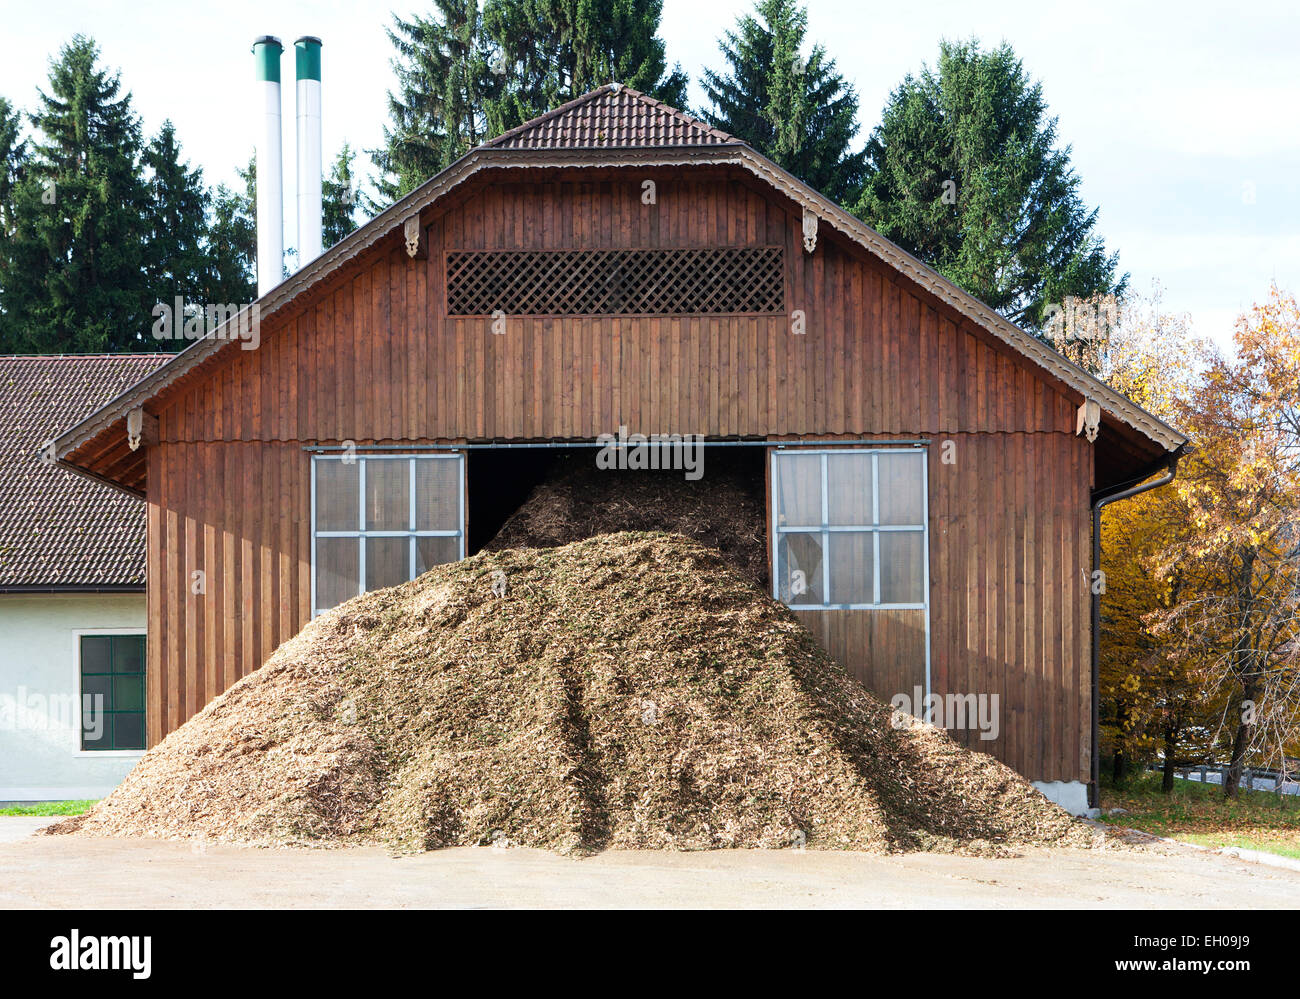 Austria, Zell am Moos, Wood chip heating system in barn Stock Photo